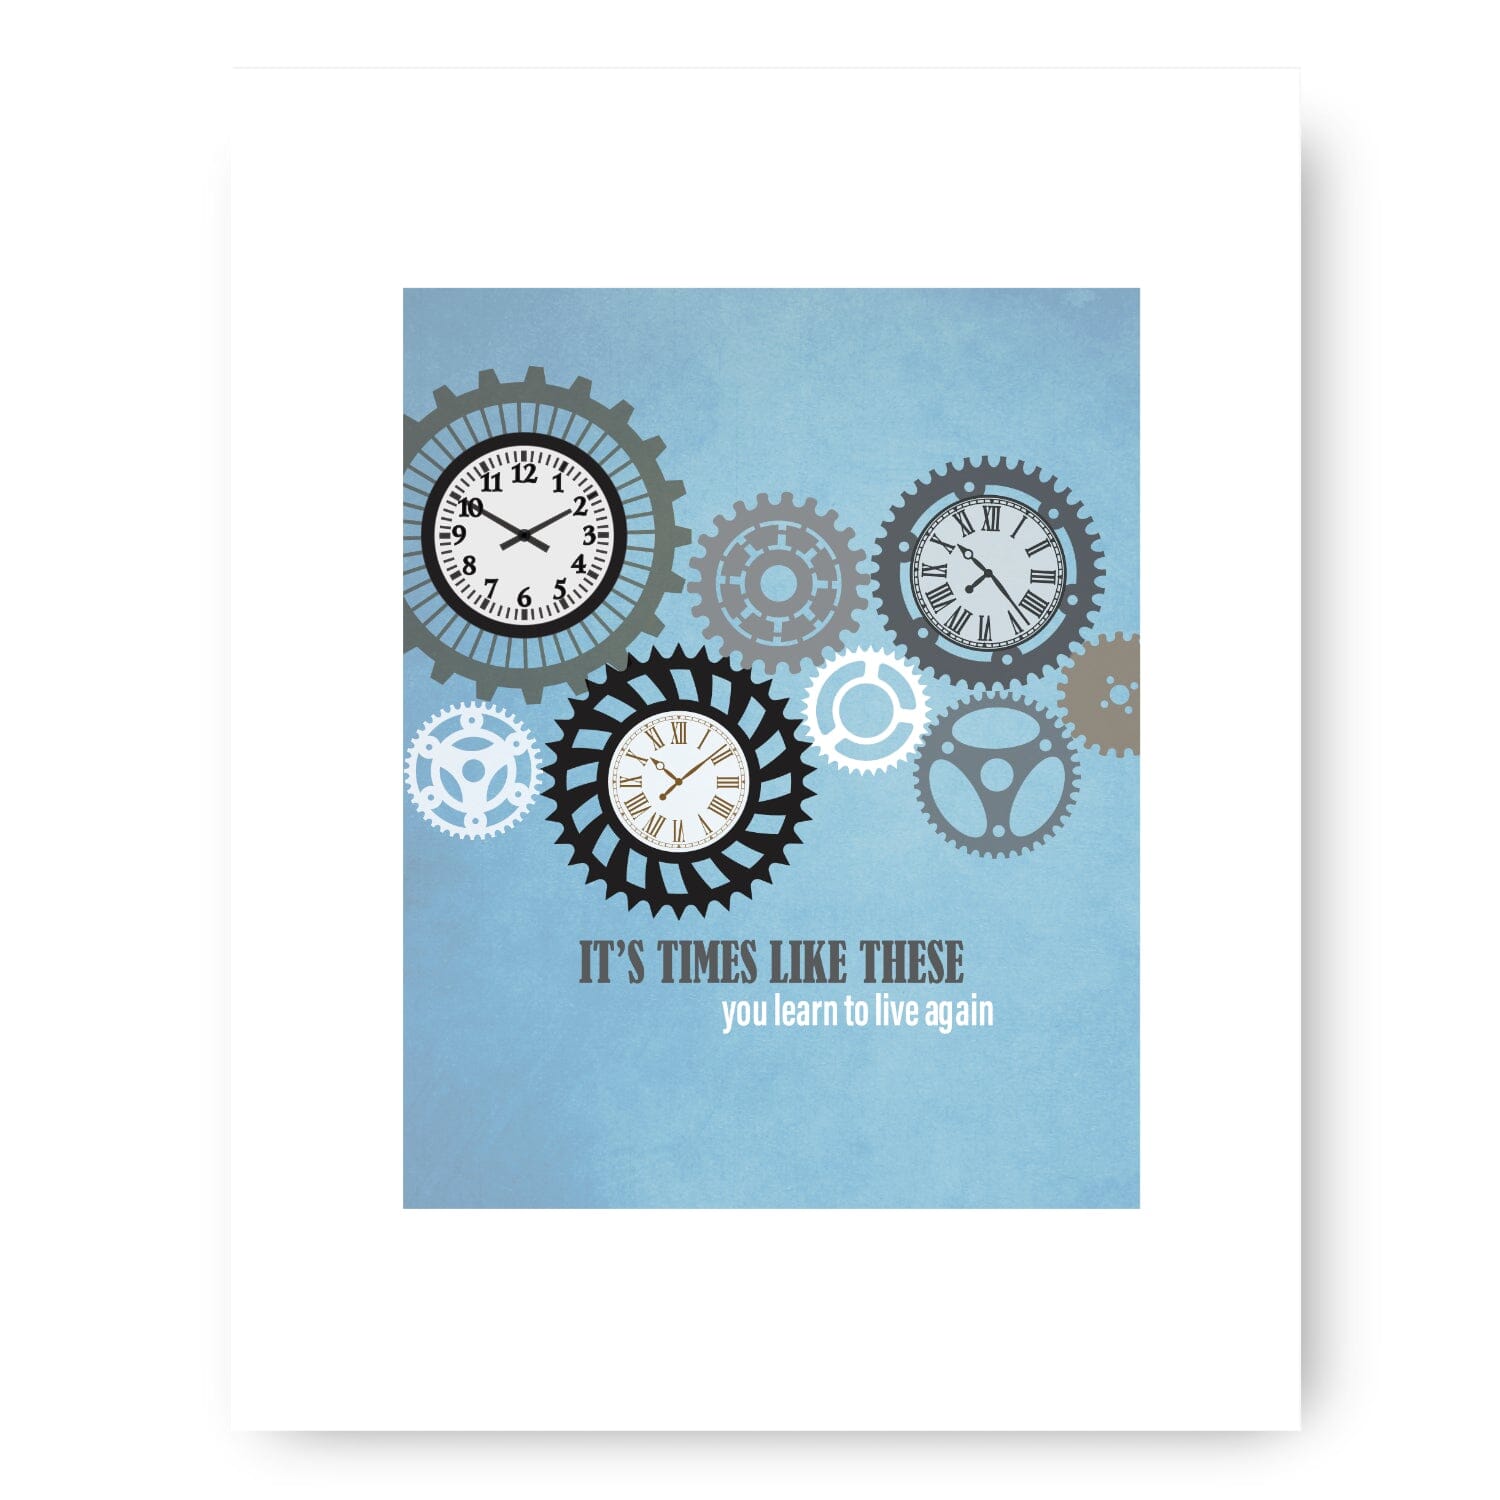 Times Like These by Foo Fighters - Song Lyric Art Wall Print – Song Lyrics  Art